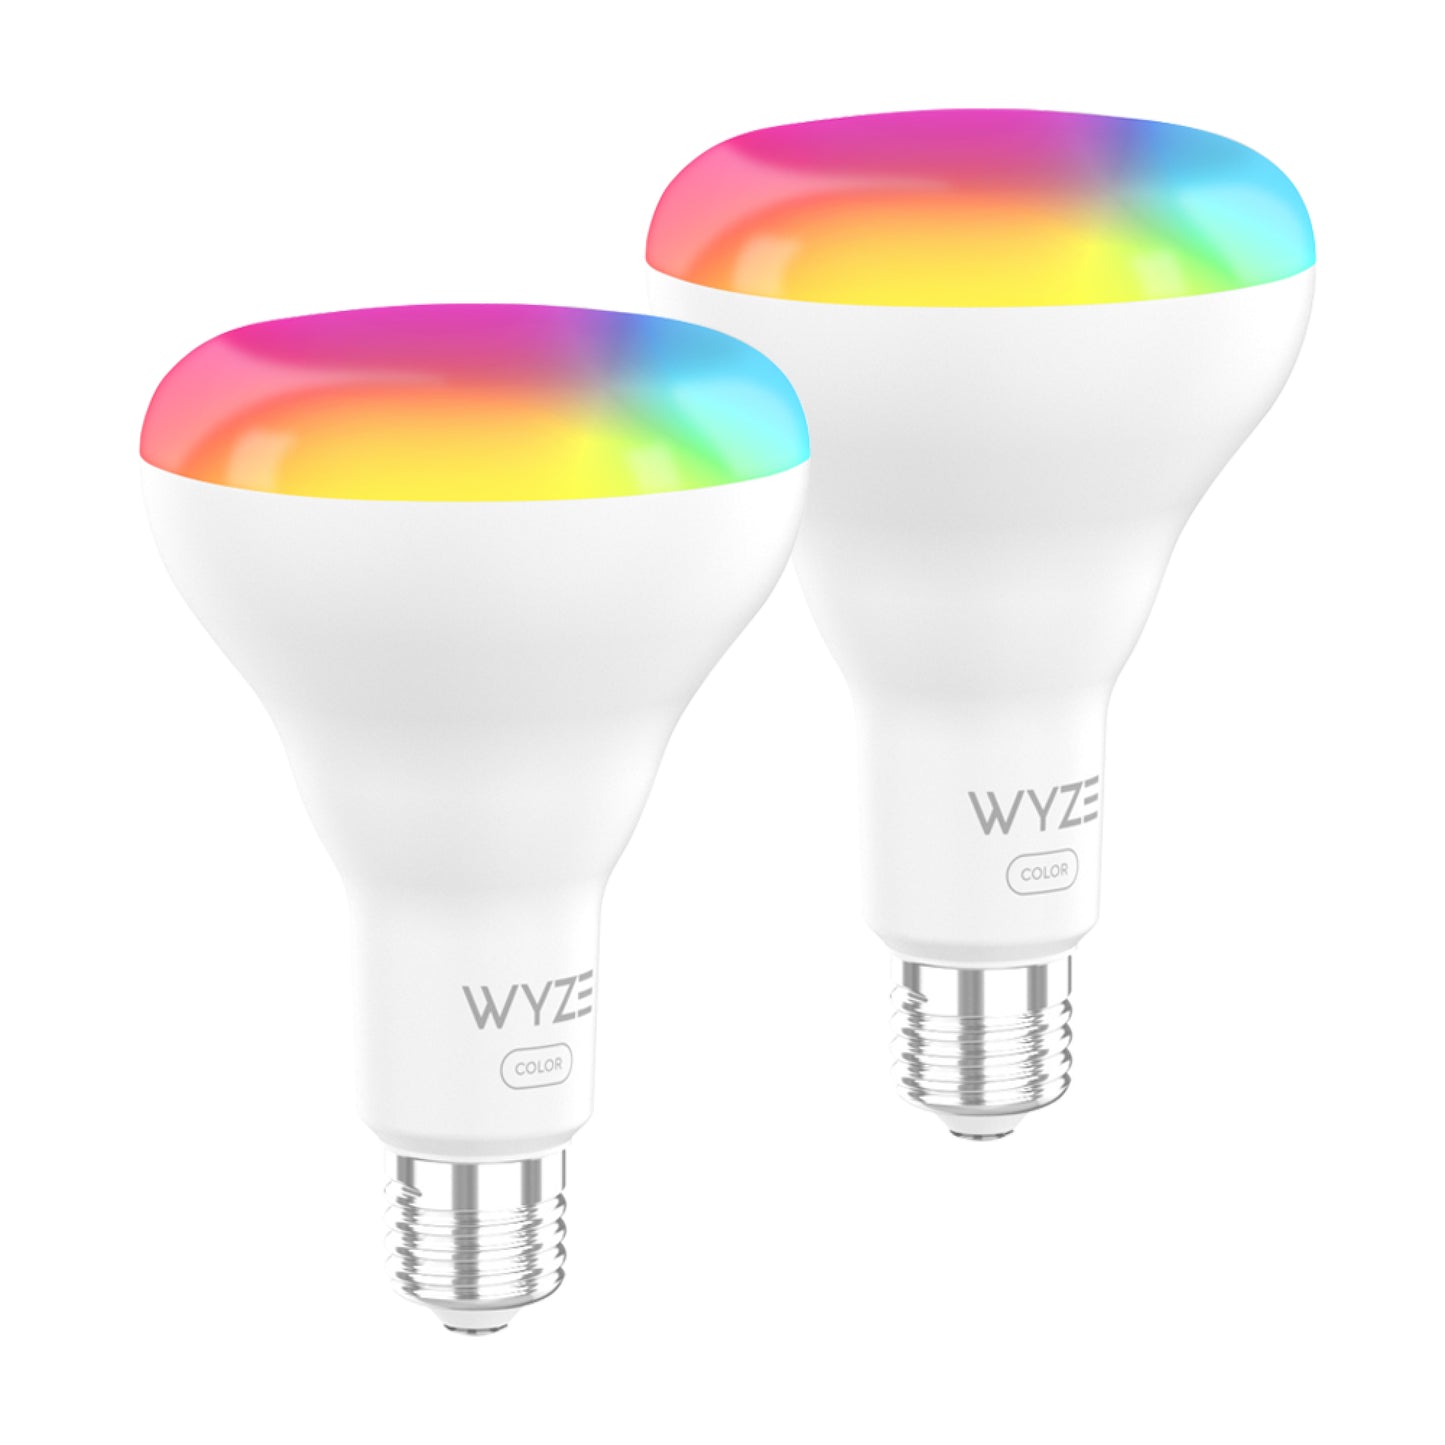 Two Wyze Buble Color BR30 product renders against a white background.